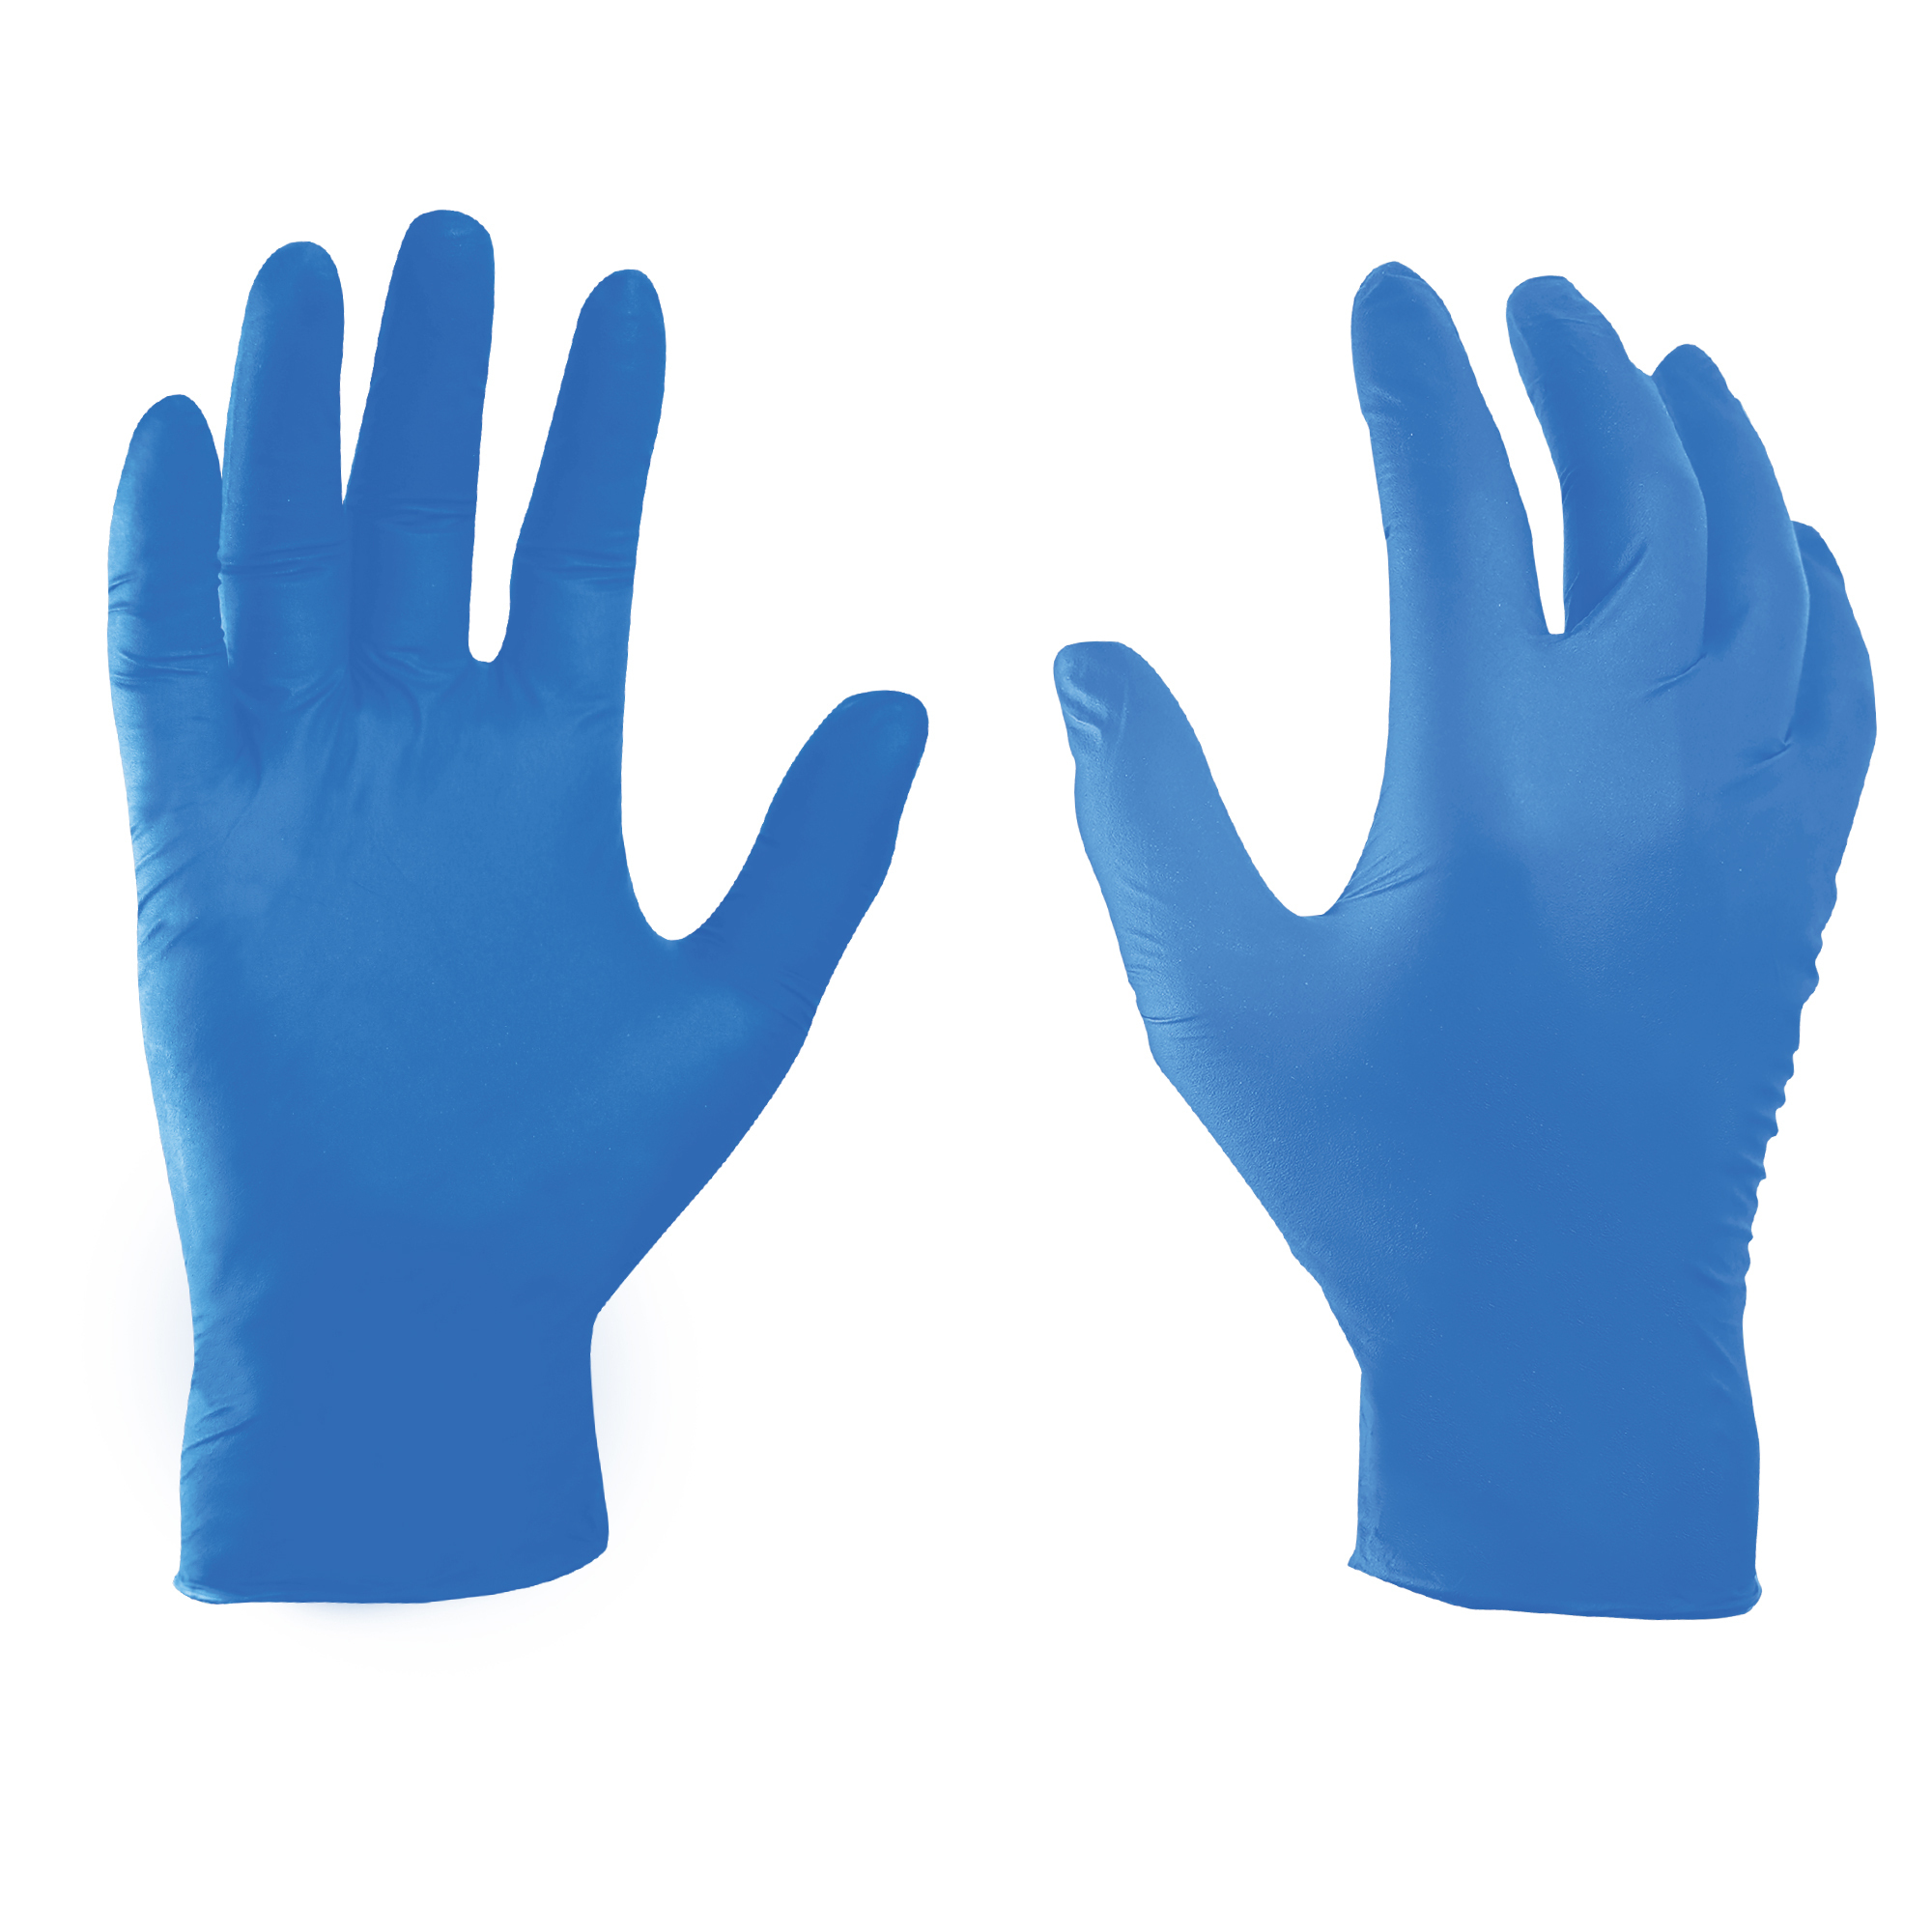 General Electric, 4mil Nitrile Blue Extra Large Gloves 100pk, Size XL, Color Blue, Included (qty.) 100 Model GG600XL